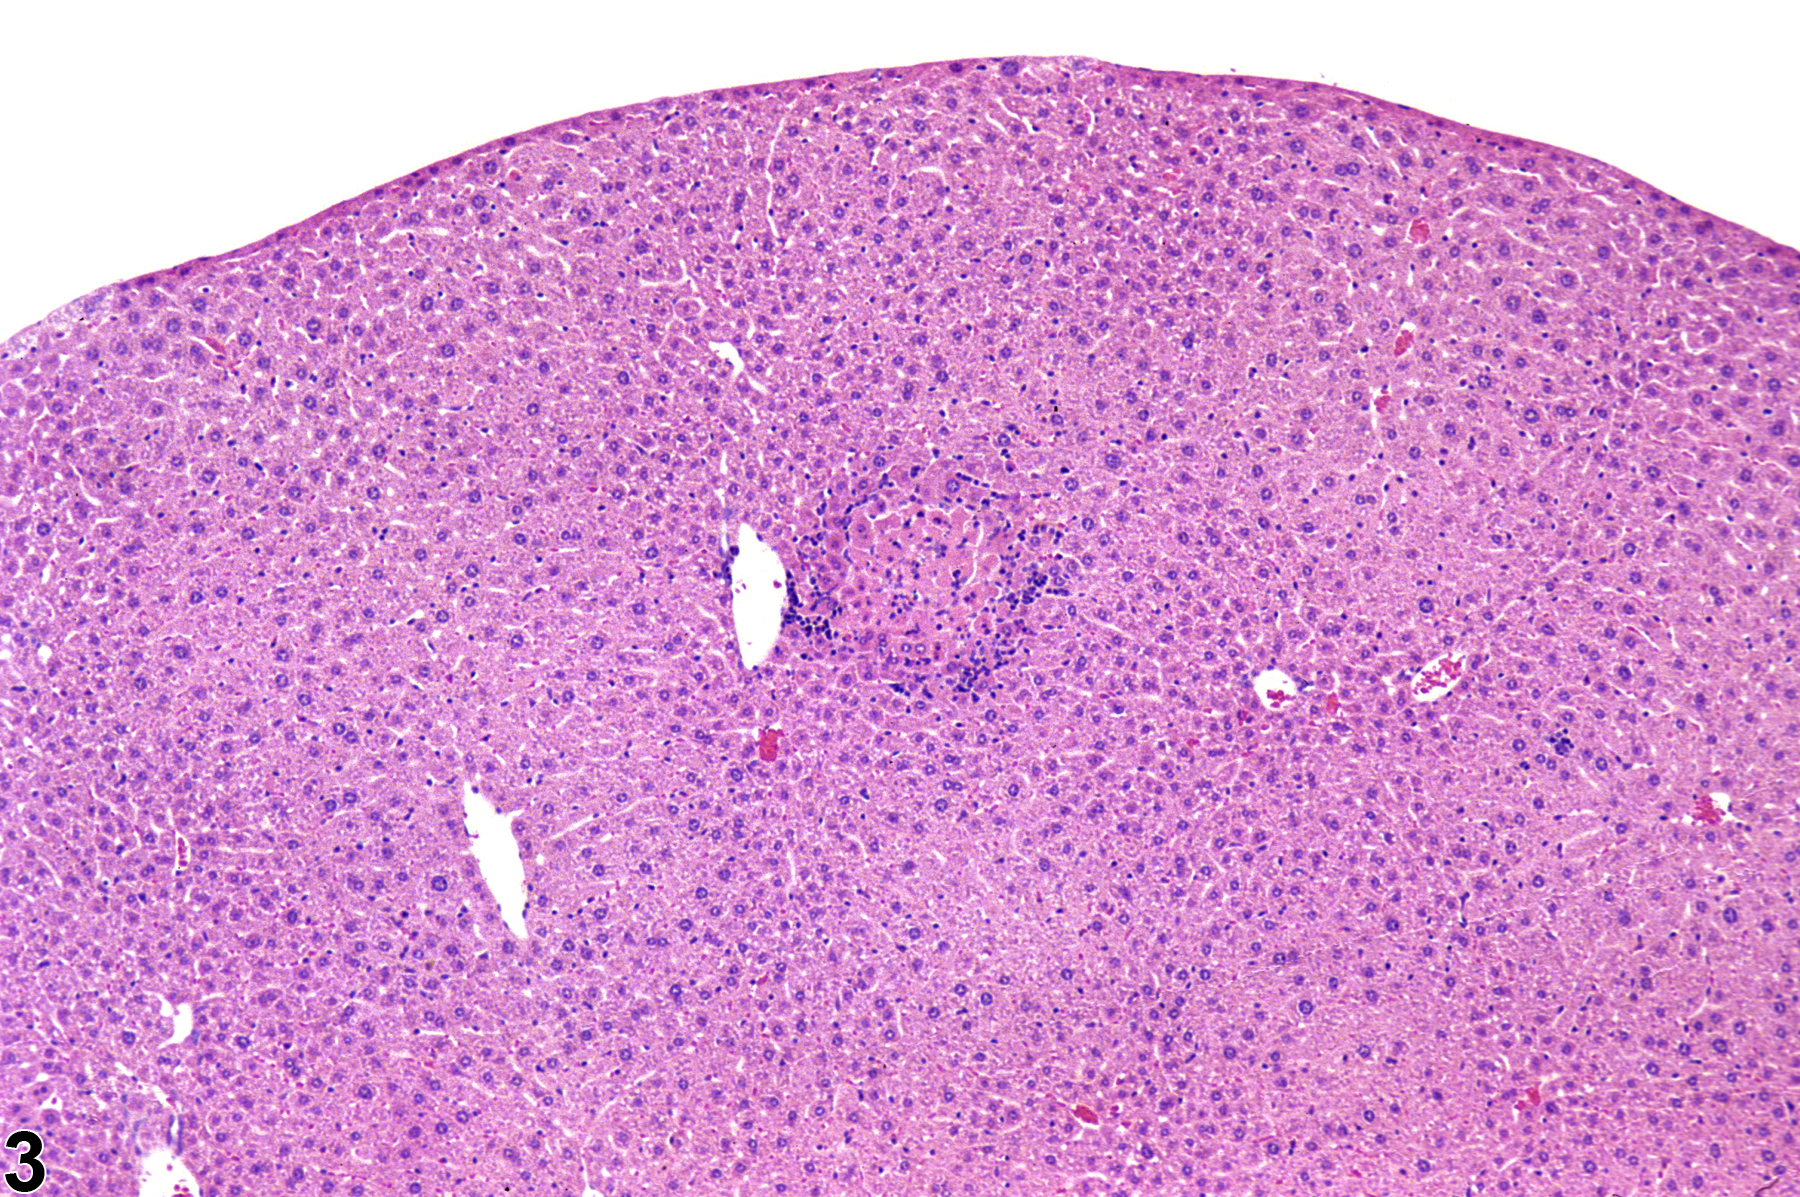 Image of inflammation in the liver from a female Swiss Webster mouse in a subchronic study